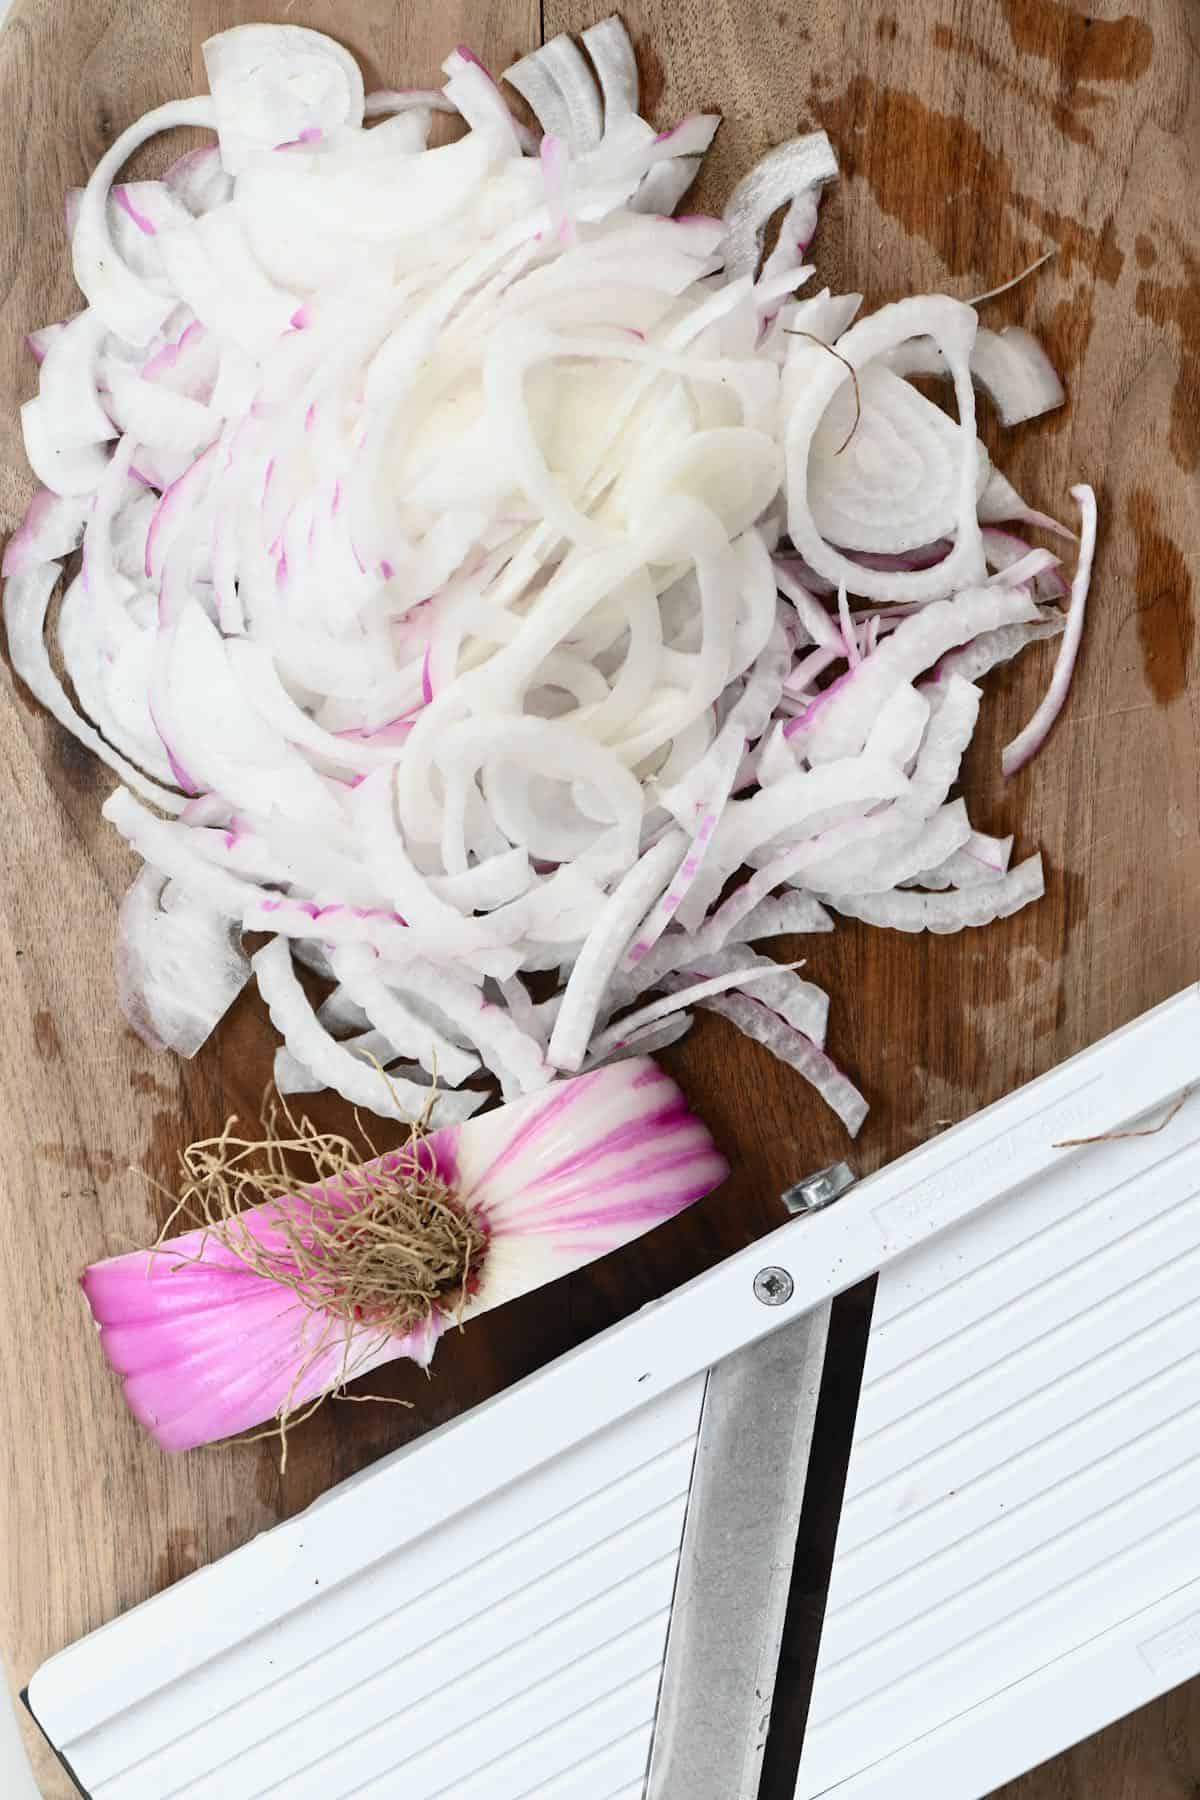 Thinly slicing onion